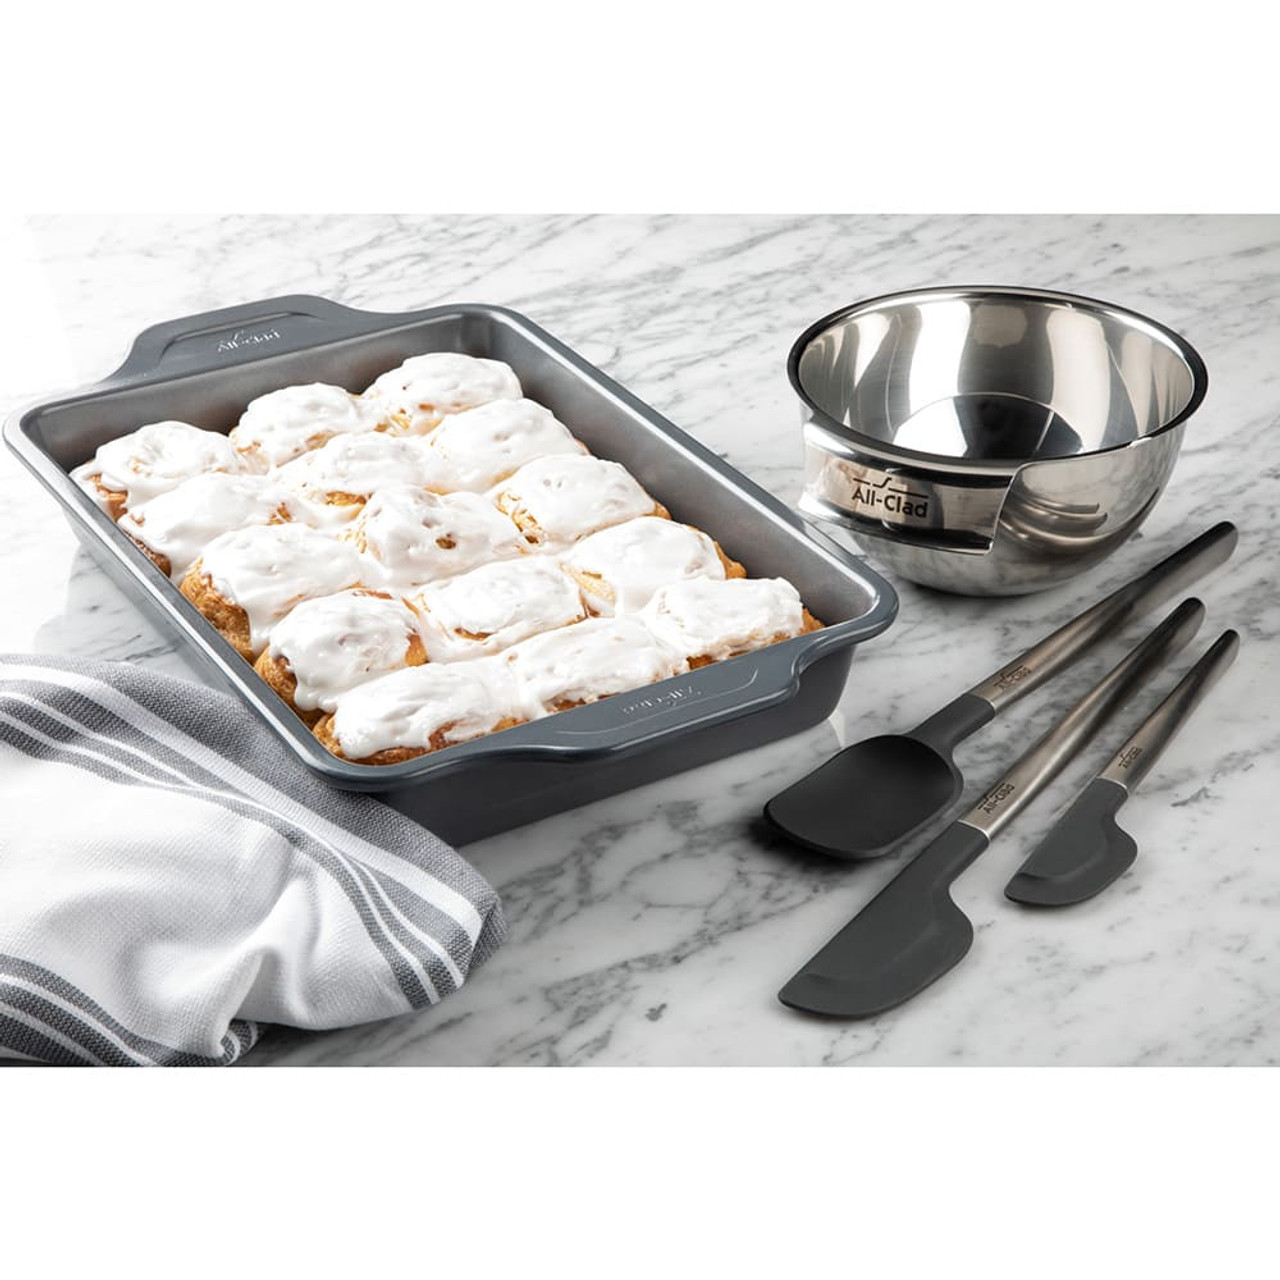 All-Clad Pro-Release Muffin Pan + Reviews